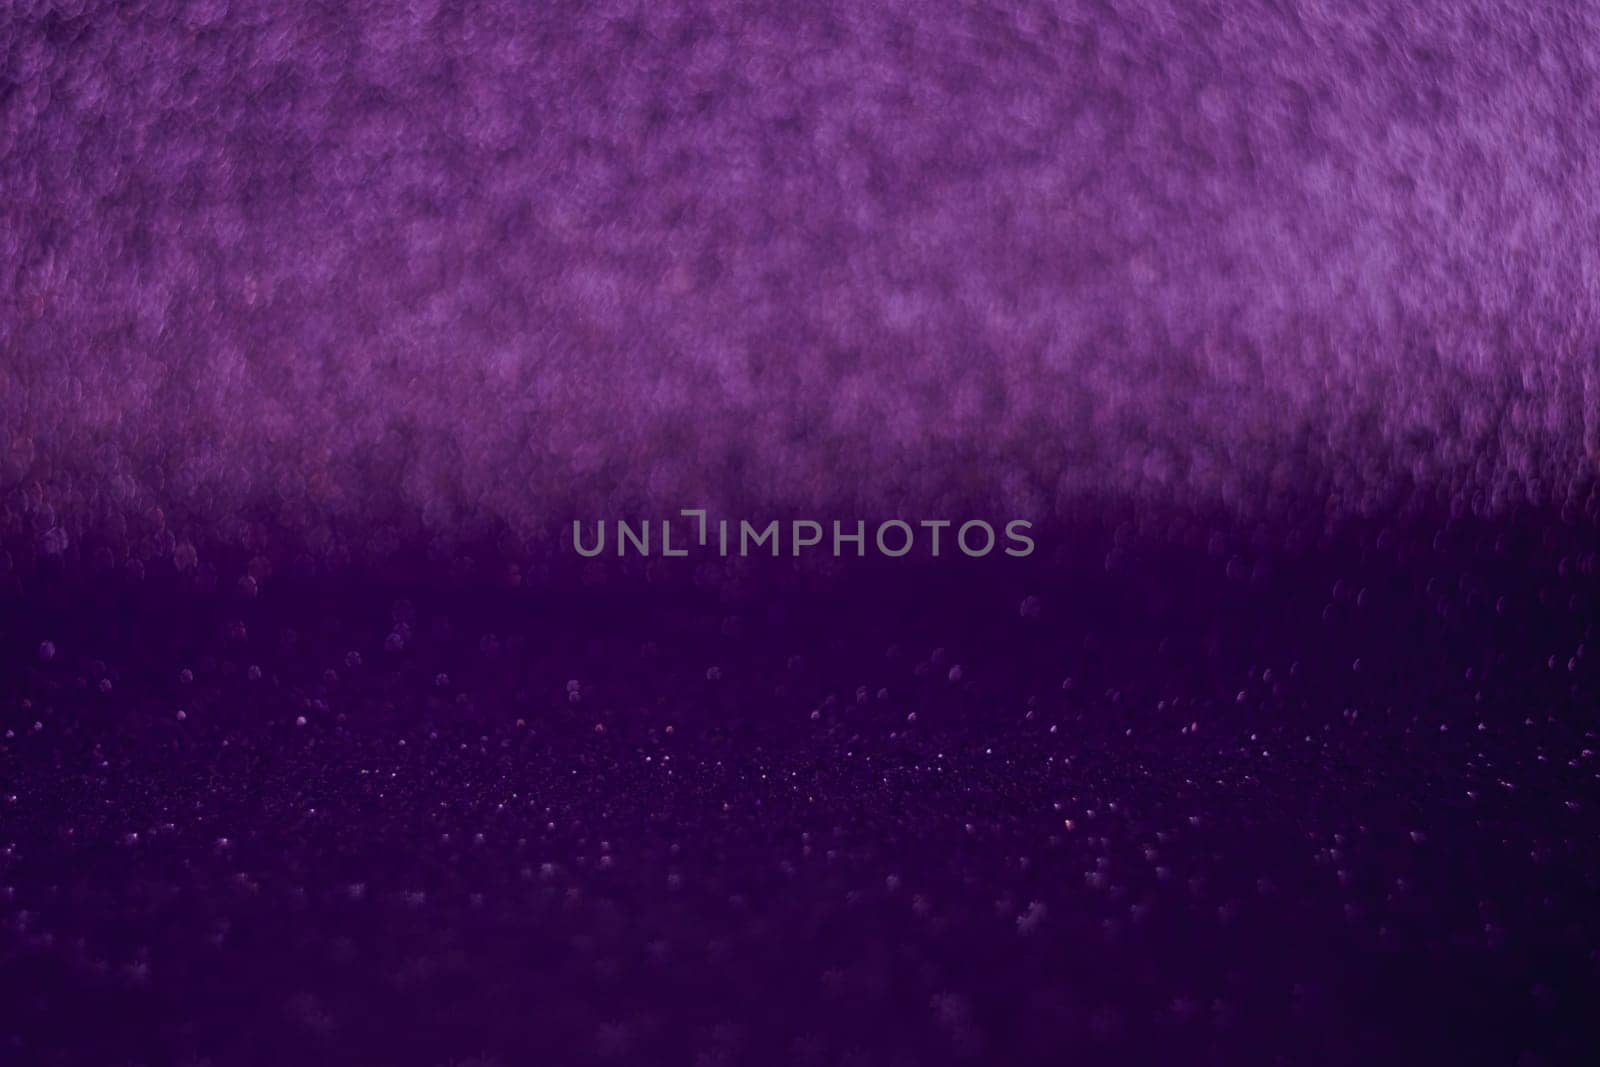 A purple backdrop featuring a blurred purple line, adding a touch of elegance and intrigue to the overall composition.